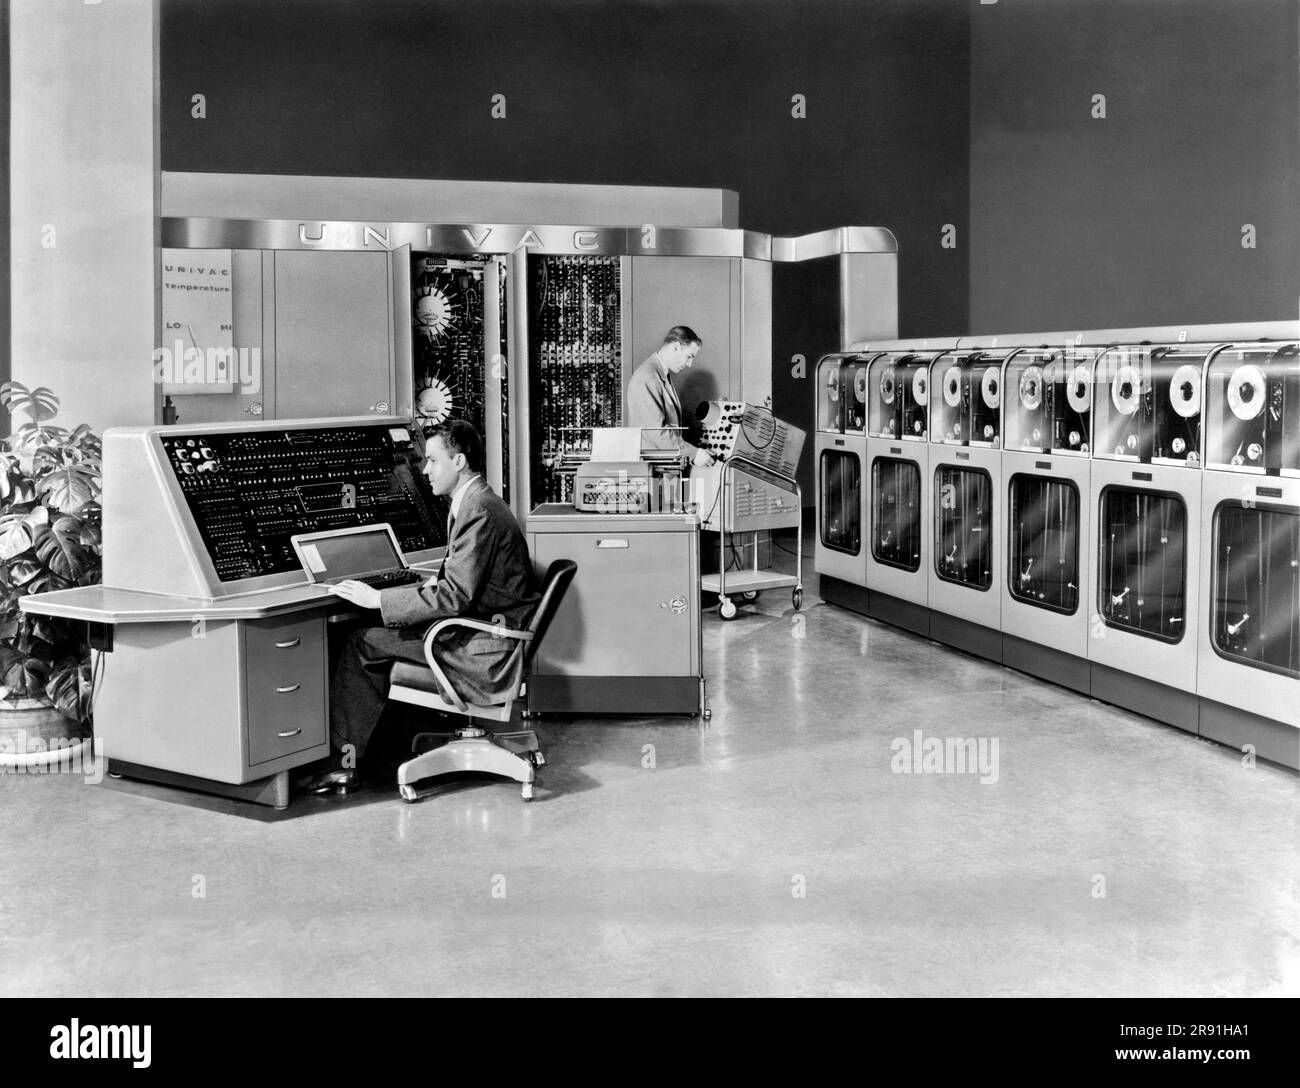 Philadelphia, Pennsylvania:  1951. The Remington Rand Univac (Universal Automatic Computer) was the first commercial computer produced in the United States. The first Univac was sold on March 31, 1951, to the U.S. Census Bureau. Stock Photo